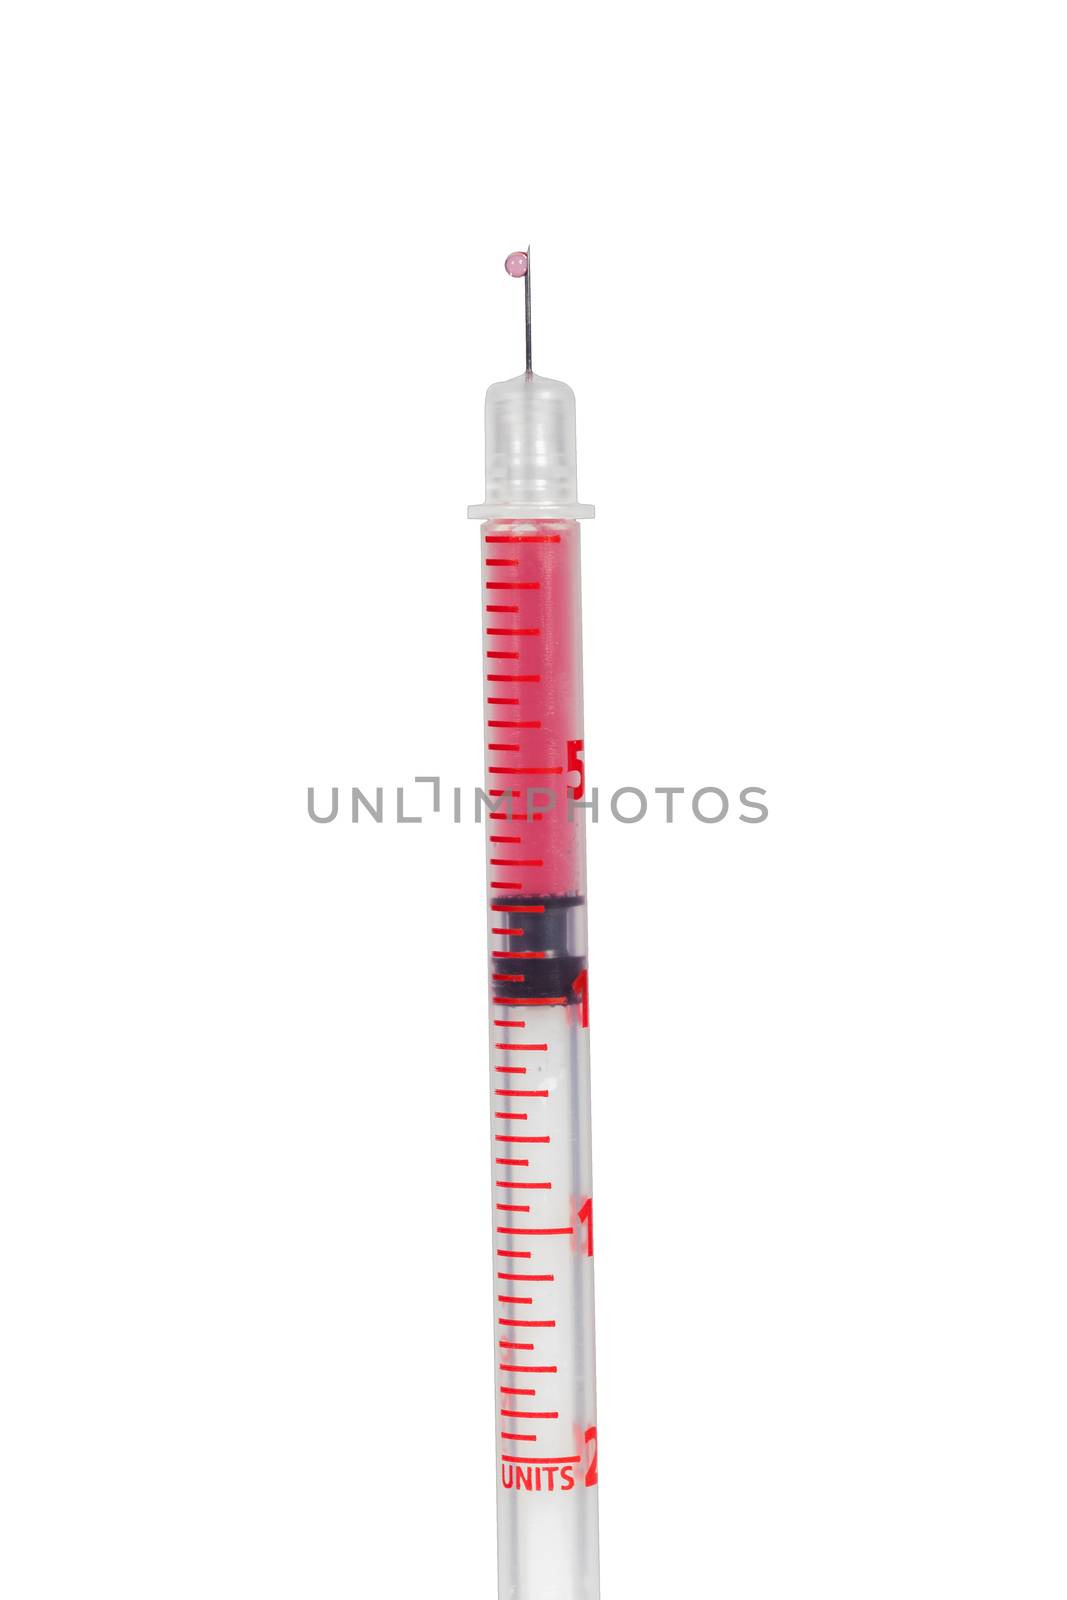 Disposable plastic hypodermic syringe and needle filled with a red solution for administering drugs subcutaneously or intramuscular isolated on white